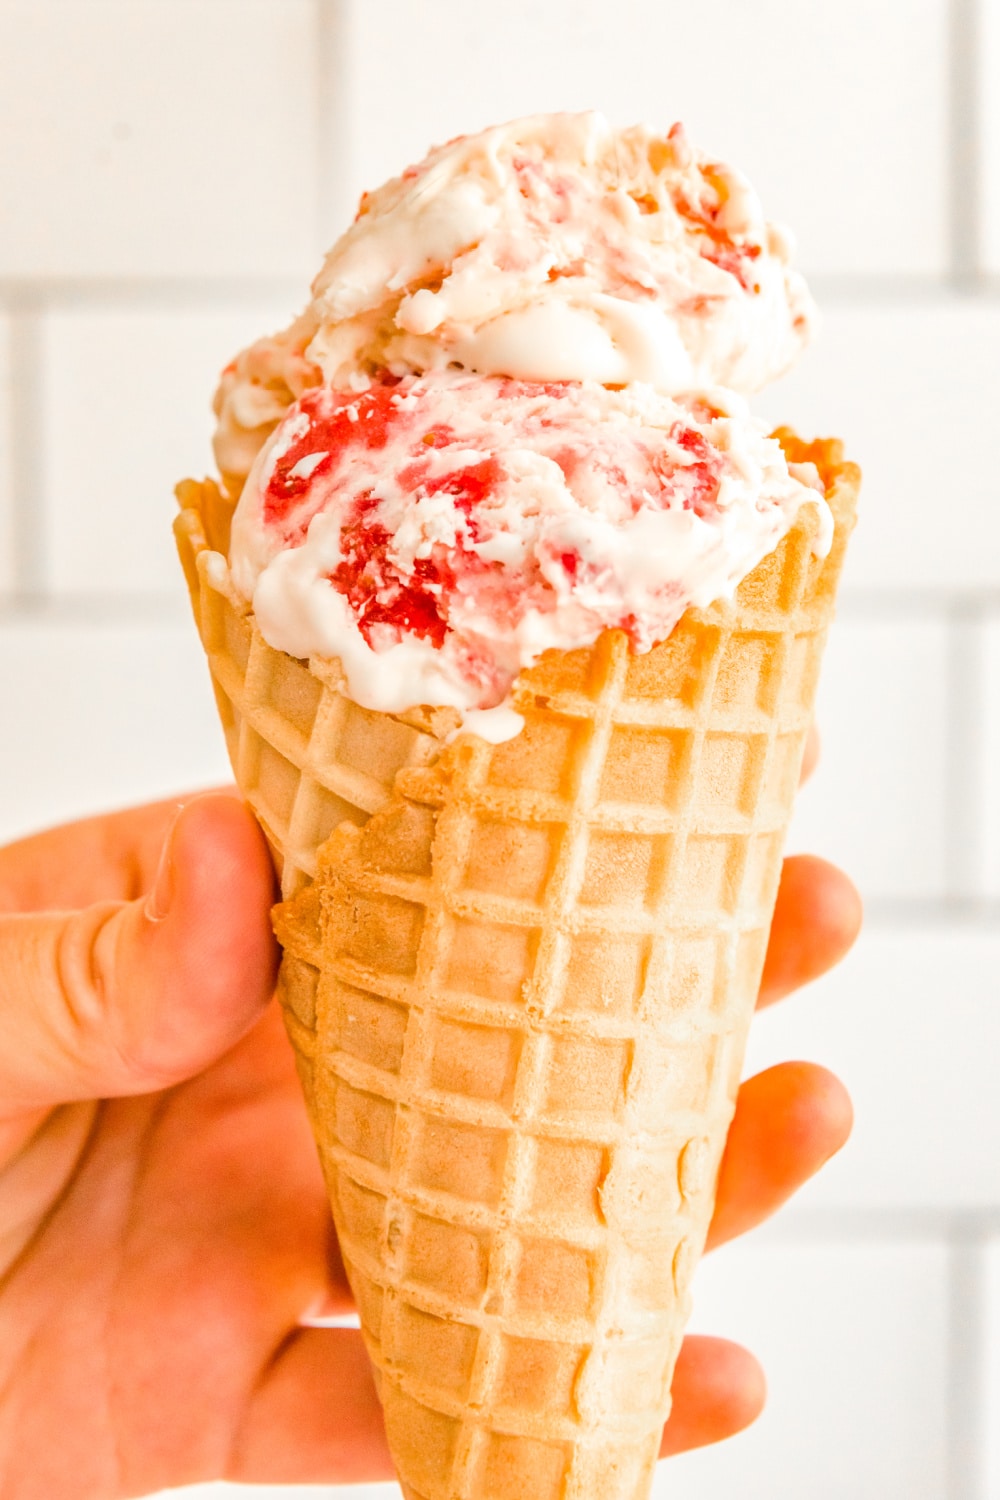 A woman's hand holding a waffle cone filled with Strawberry Ice Cream.